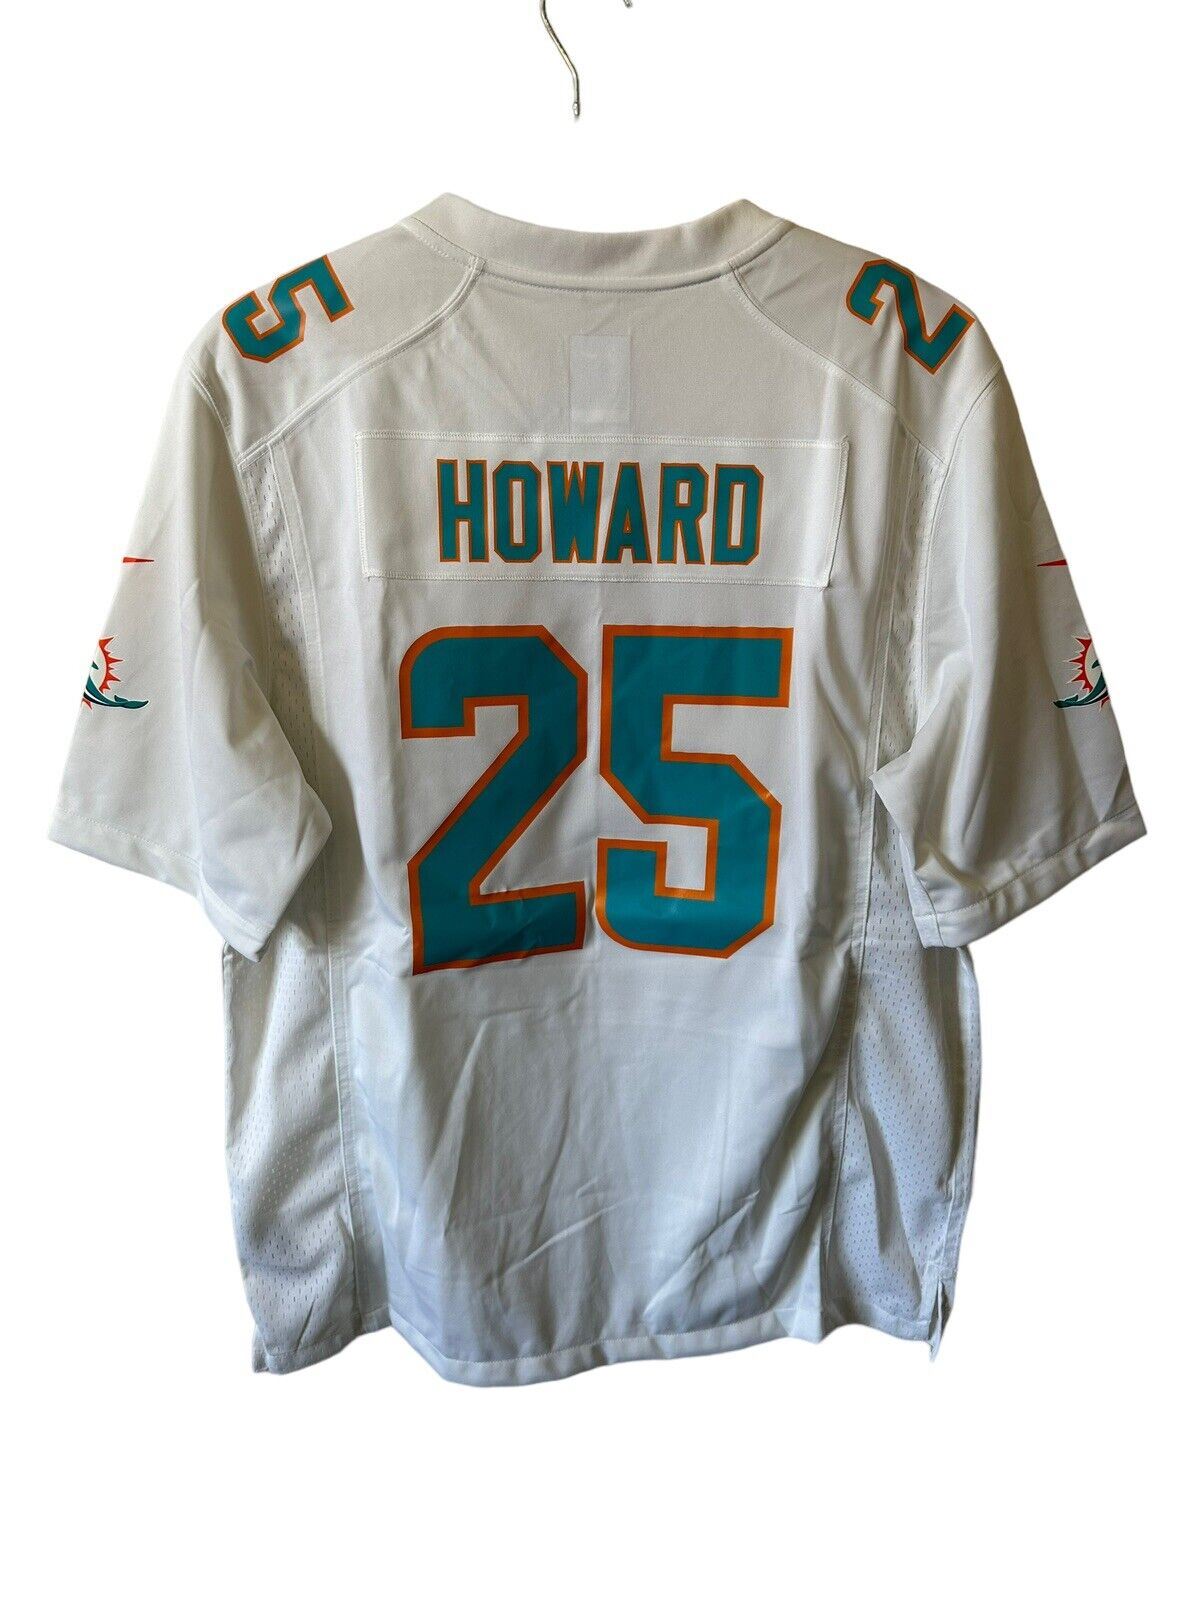 Nike NFL Miami Dolphins Jersey HOWARD Mens Large